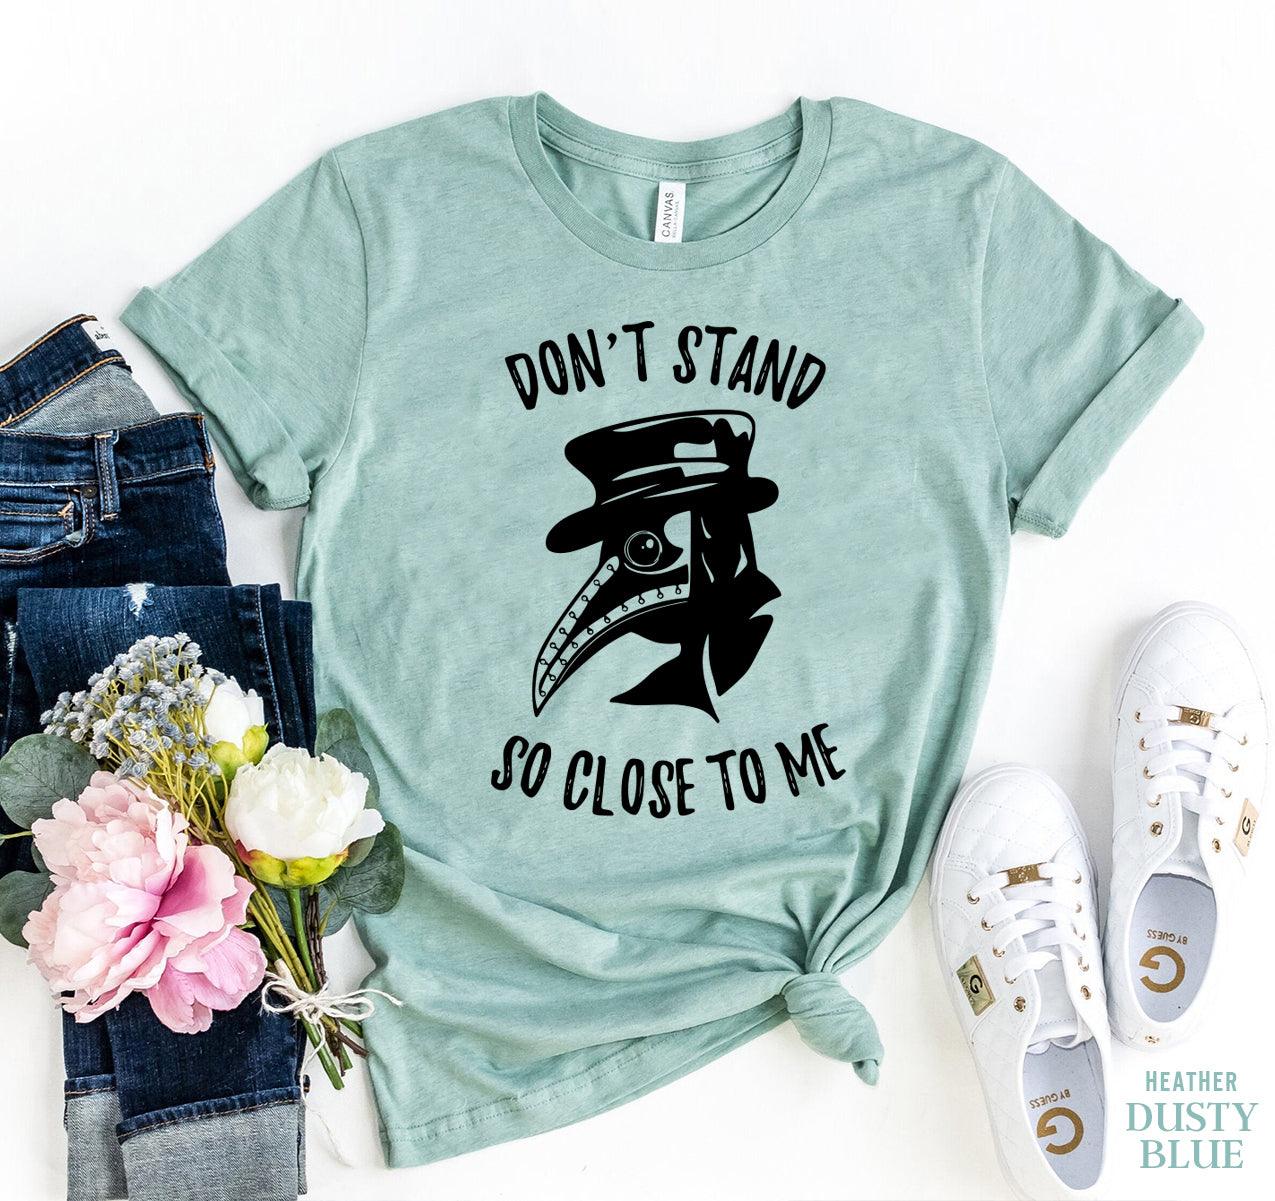 Don't Stand So Close To Me T-shirt - VirtuousWares:Global